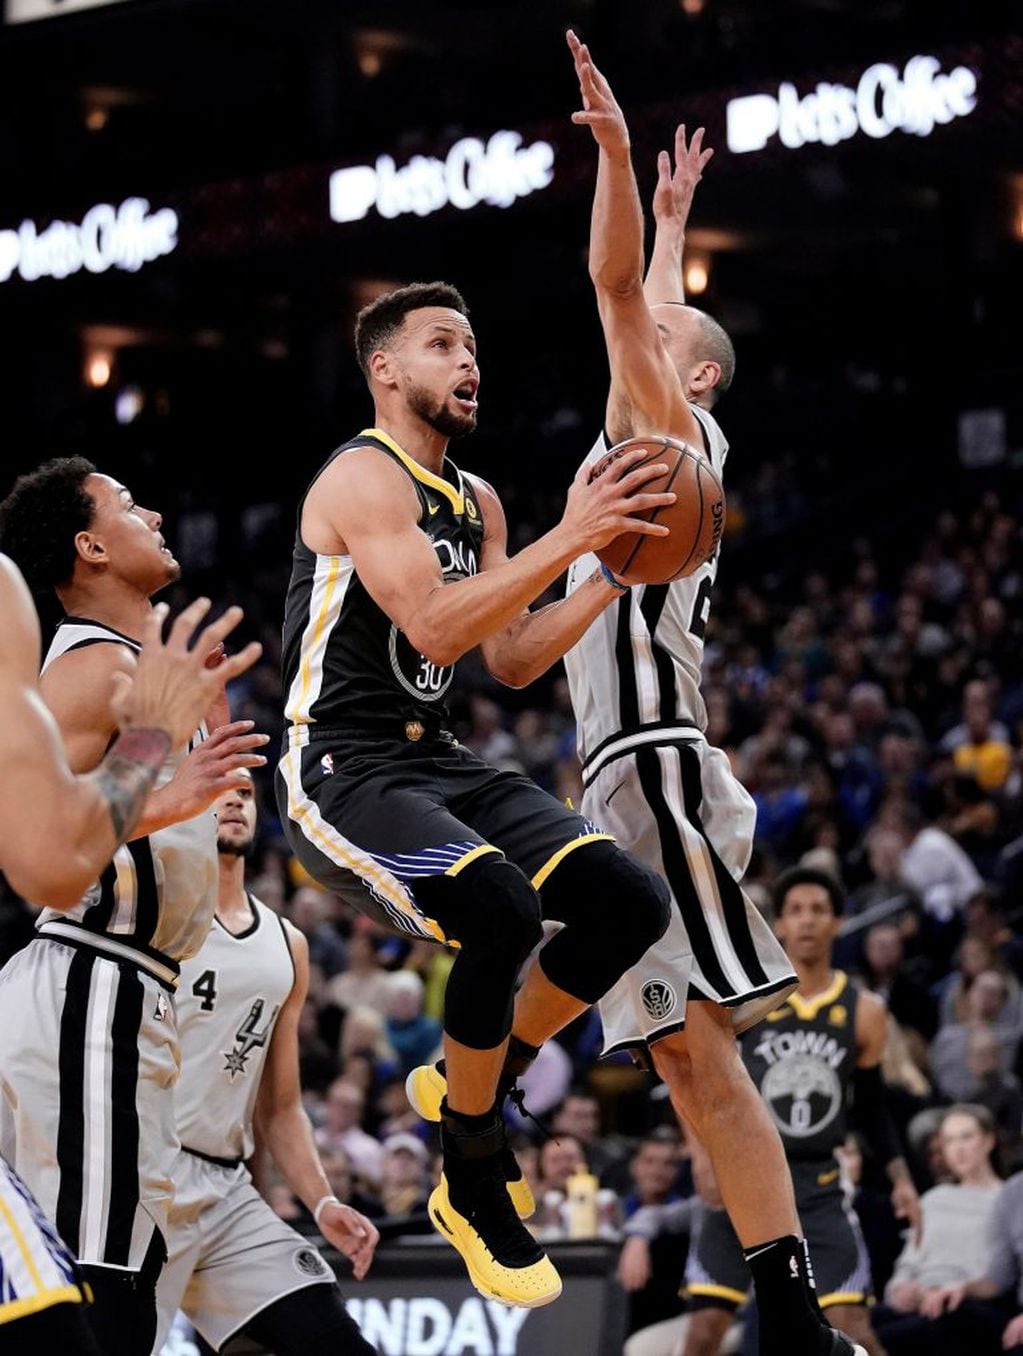 JGM02. Oakland (United States), 11/02/2018.- Golden State Warriors guard Stephen Curry (C) goes to the basket as San Antonio Spurs guard Manu Ginobili (R) defends during the first half of their NBA game at Oracle Arena in Oakland, California, USA, 10 February 2018. (Baloncesto, Estados Unidos) EFE/EPA/JOHN G. MABANGLO